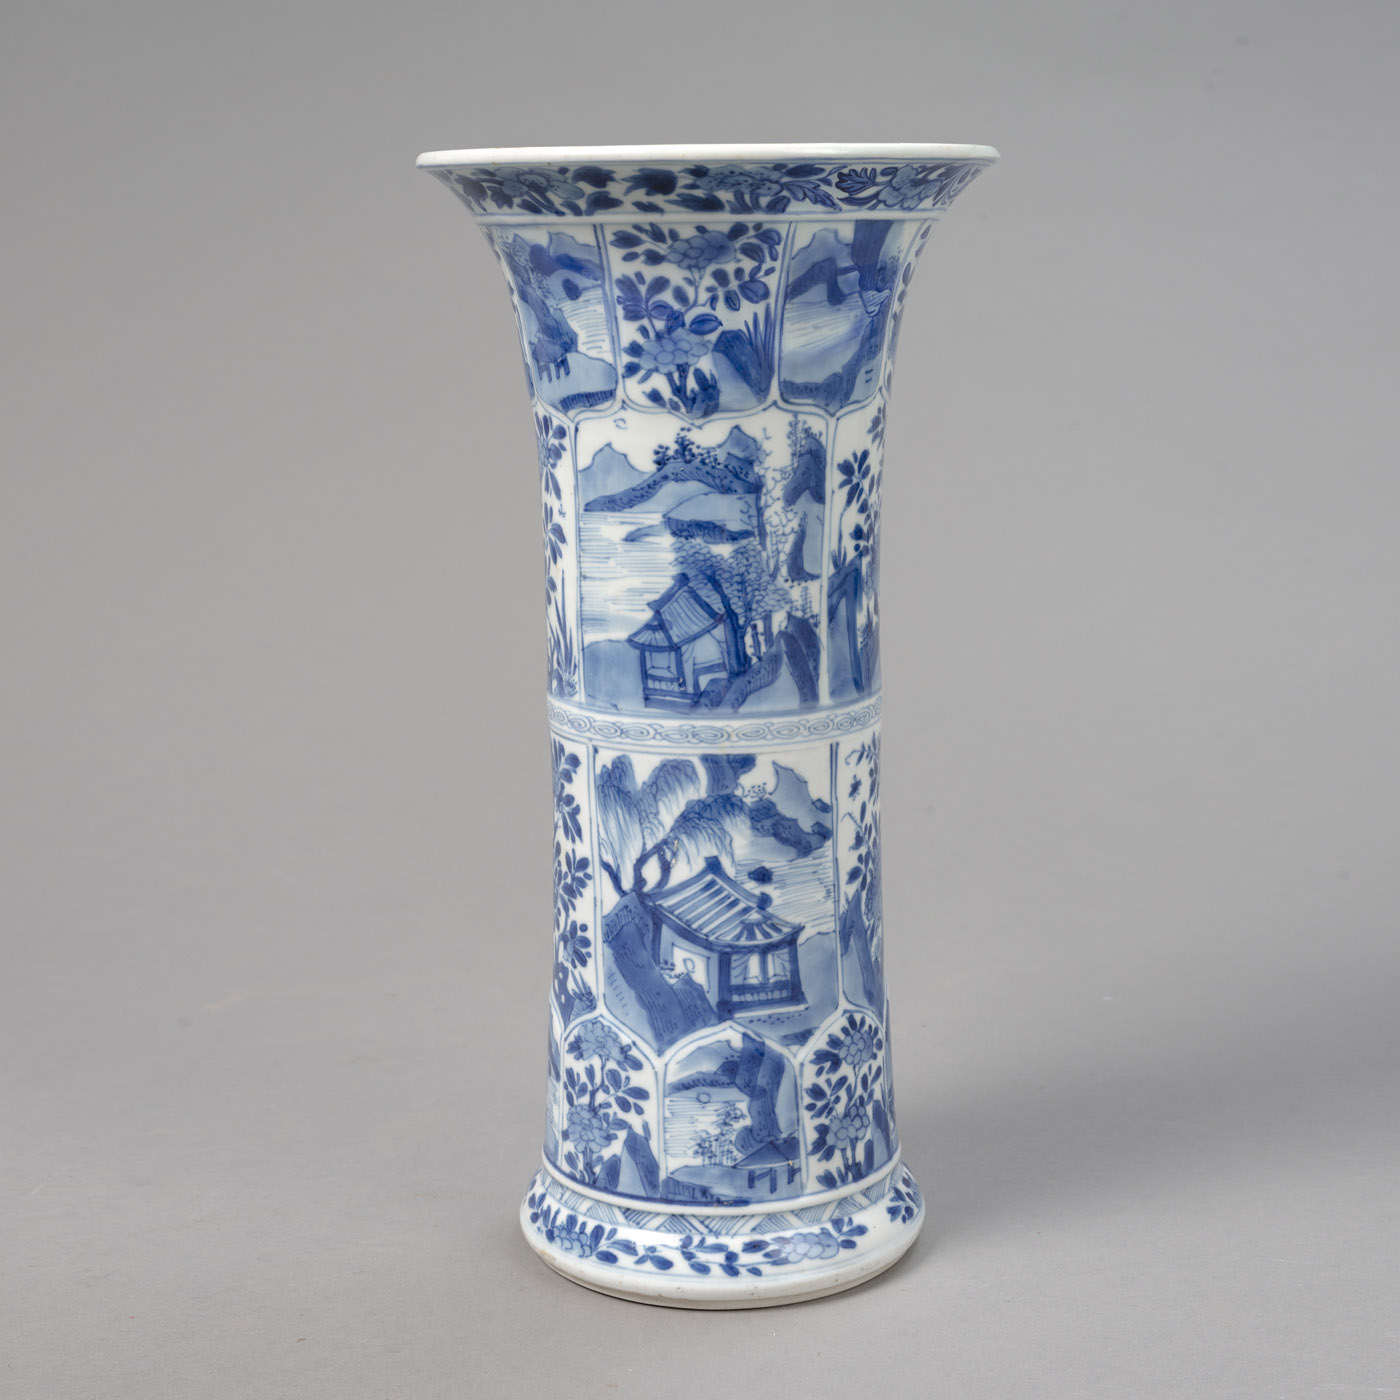 <b>A BLUE AND WHITE 'GU'-VASE DECORATED WITH LANDSCAPES AND FLOWERS IN VARIOUS CARTOUCHES</b>